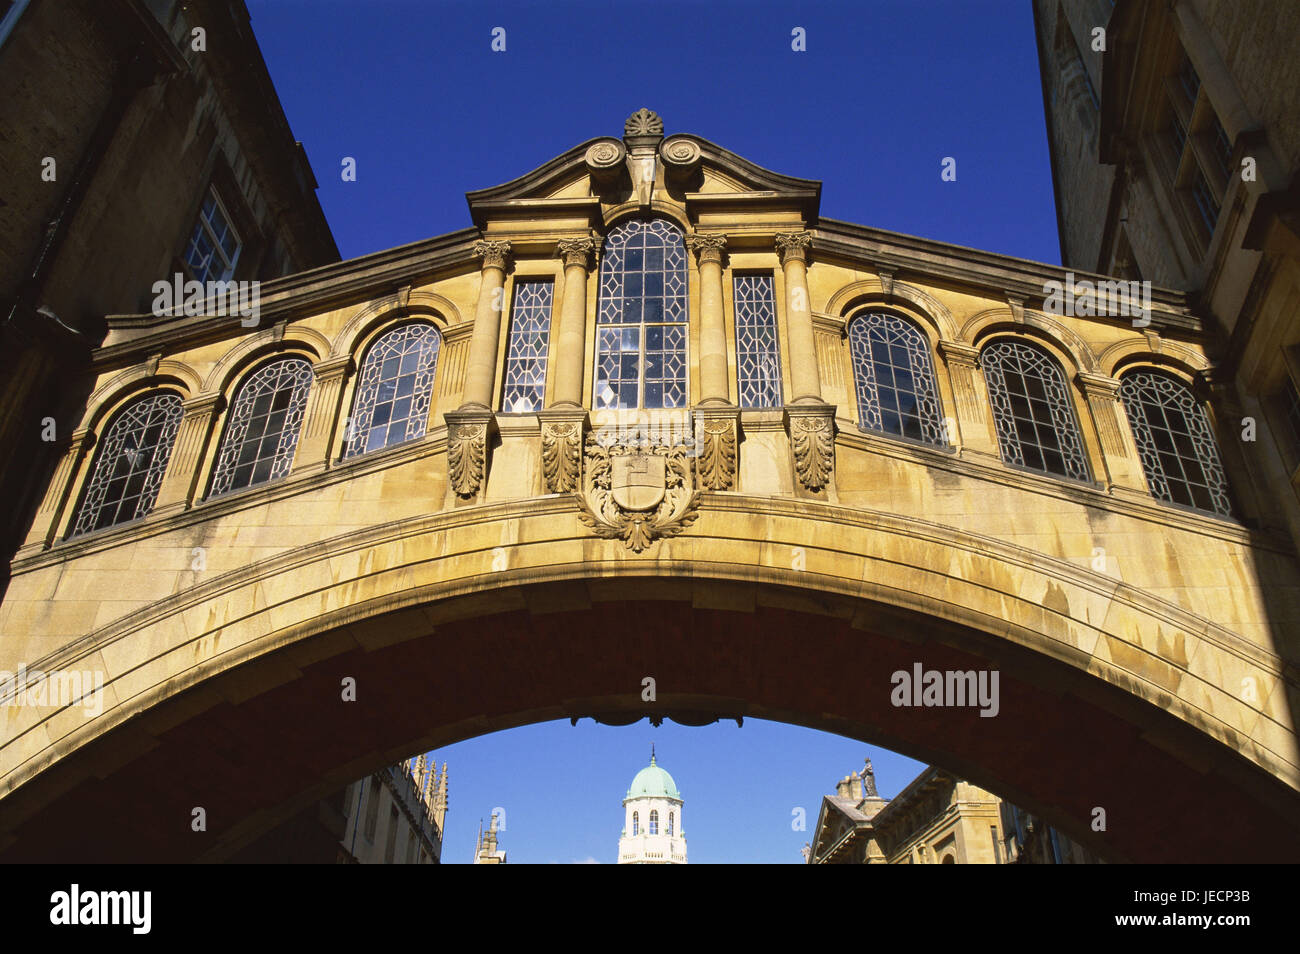 Great Britain, England, Oxfordshire, Oxford, Hertford college, bridge, Europe, town, university town, building, structure, architecture, historically, outside, deserted, place of interest, connection, tourist attraction, landmark, architecture, connection bridge, parts of the building, Stock Photo